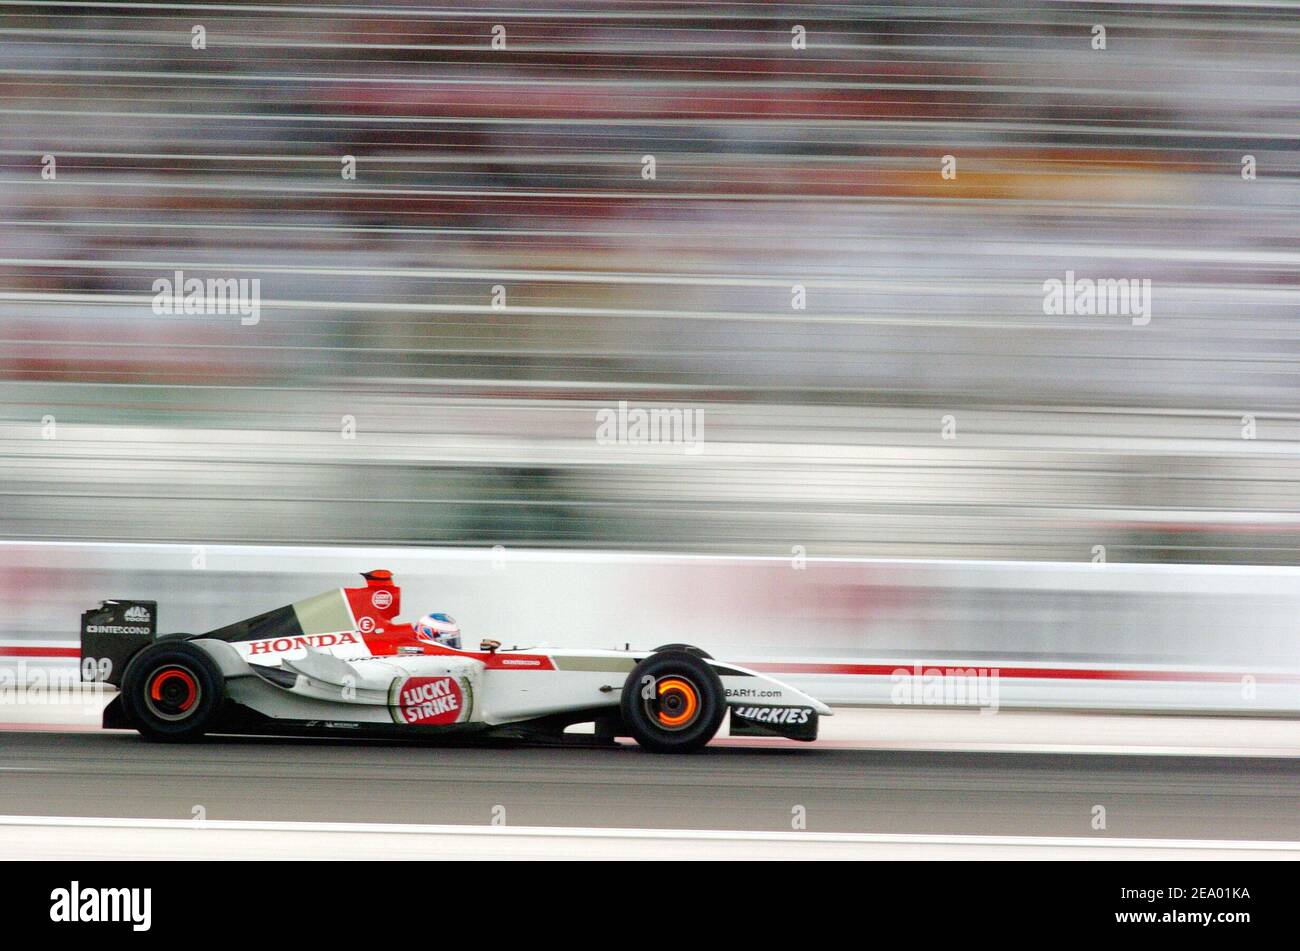 U.K Formula 1 driver Jenson Button (Bar team) during the formula 1 Grand Prix in Indianapolis, IN, USA, on June 20, 2004. Photo by Thierry Gromik/ABACA. Stock Photo